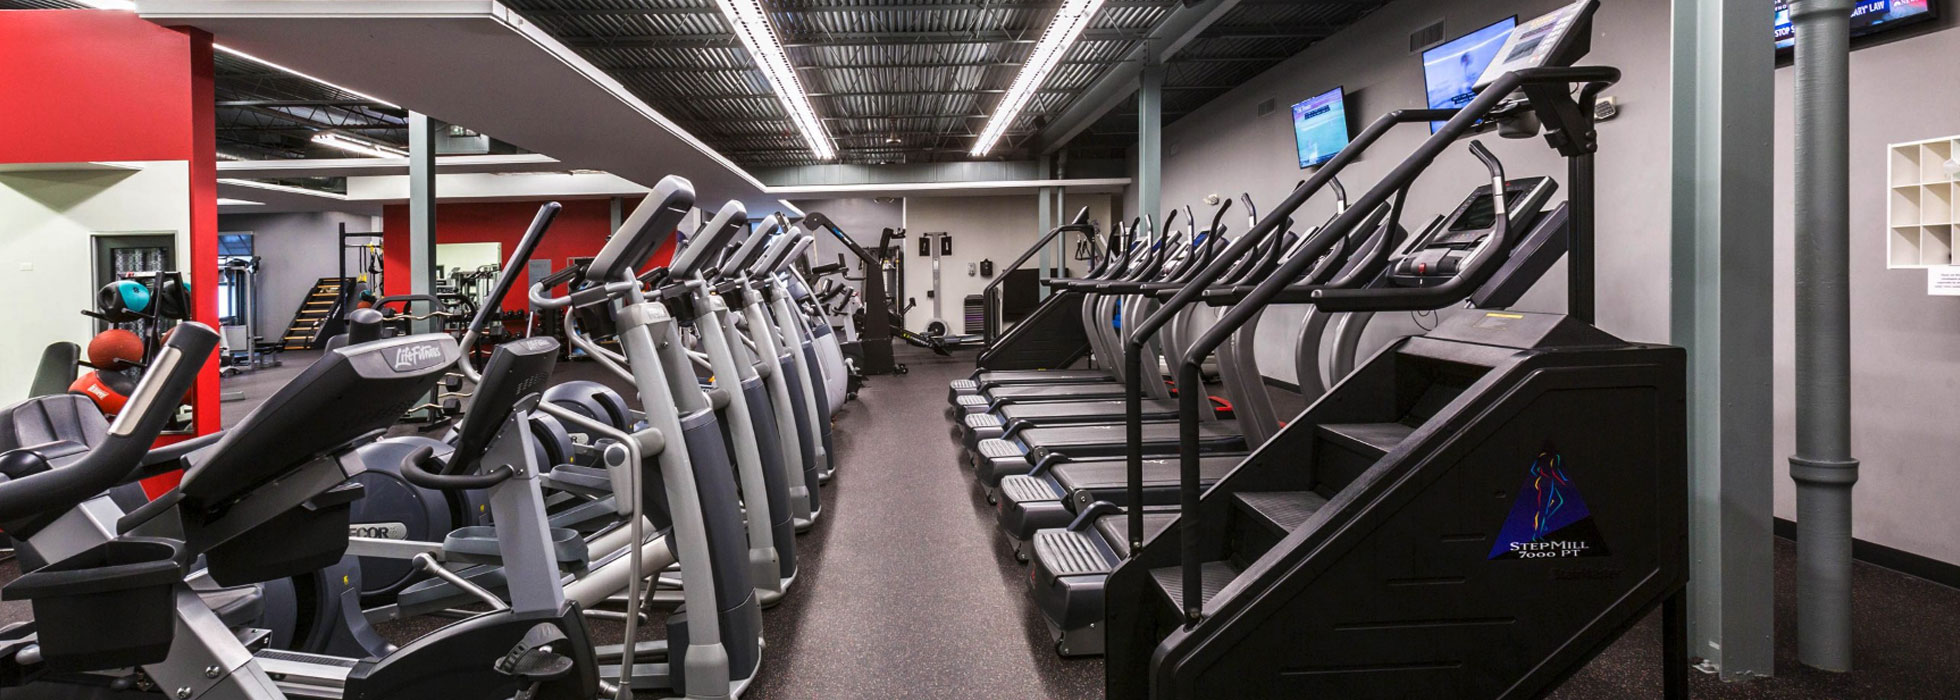 Best Fitness Training Facility Near River Oaks Is At GTR Fit